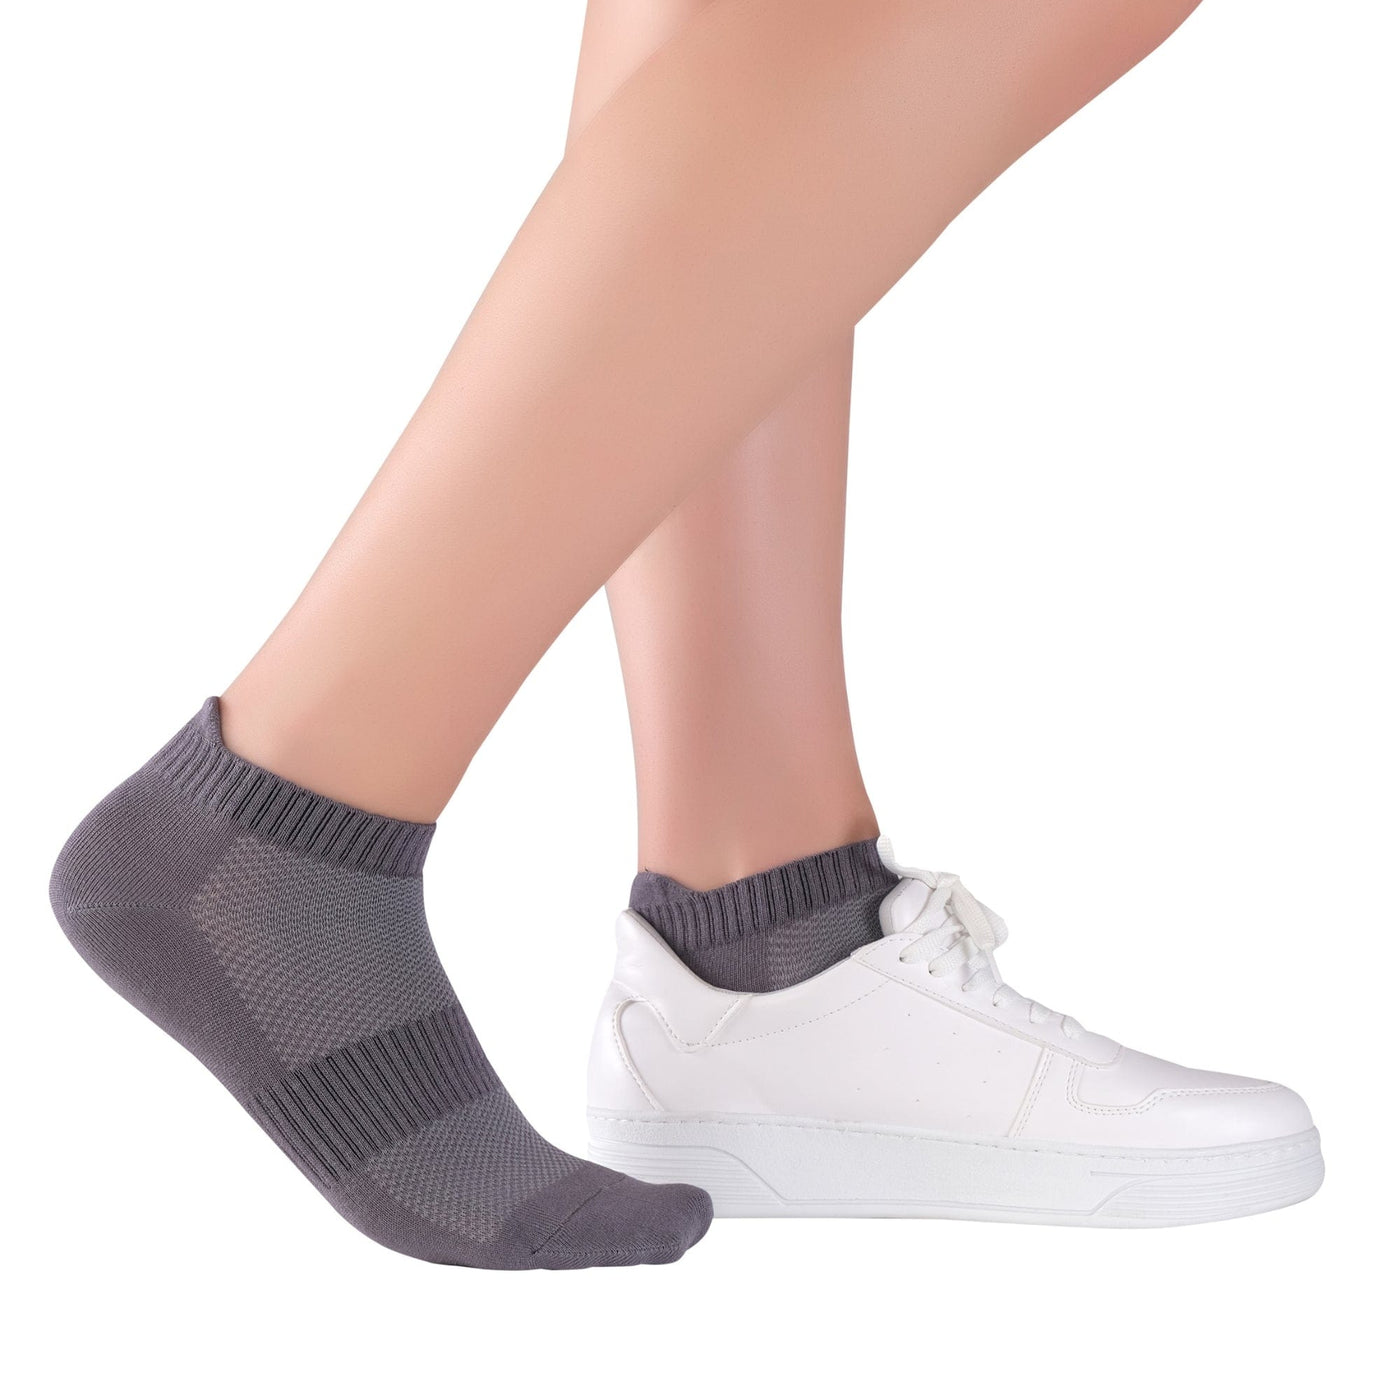 Elyfer Thin Bamboo Unisex Ankle Socks Low Cut Ankle Breathable Sports #color_grey